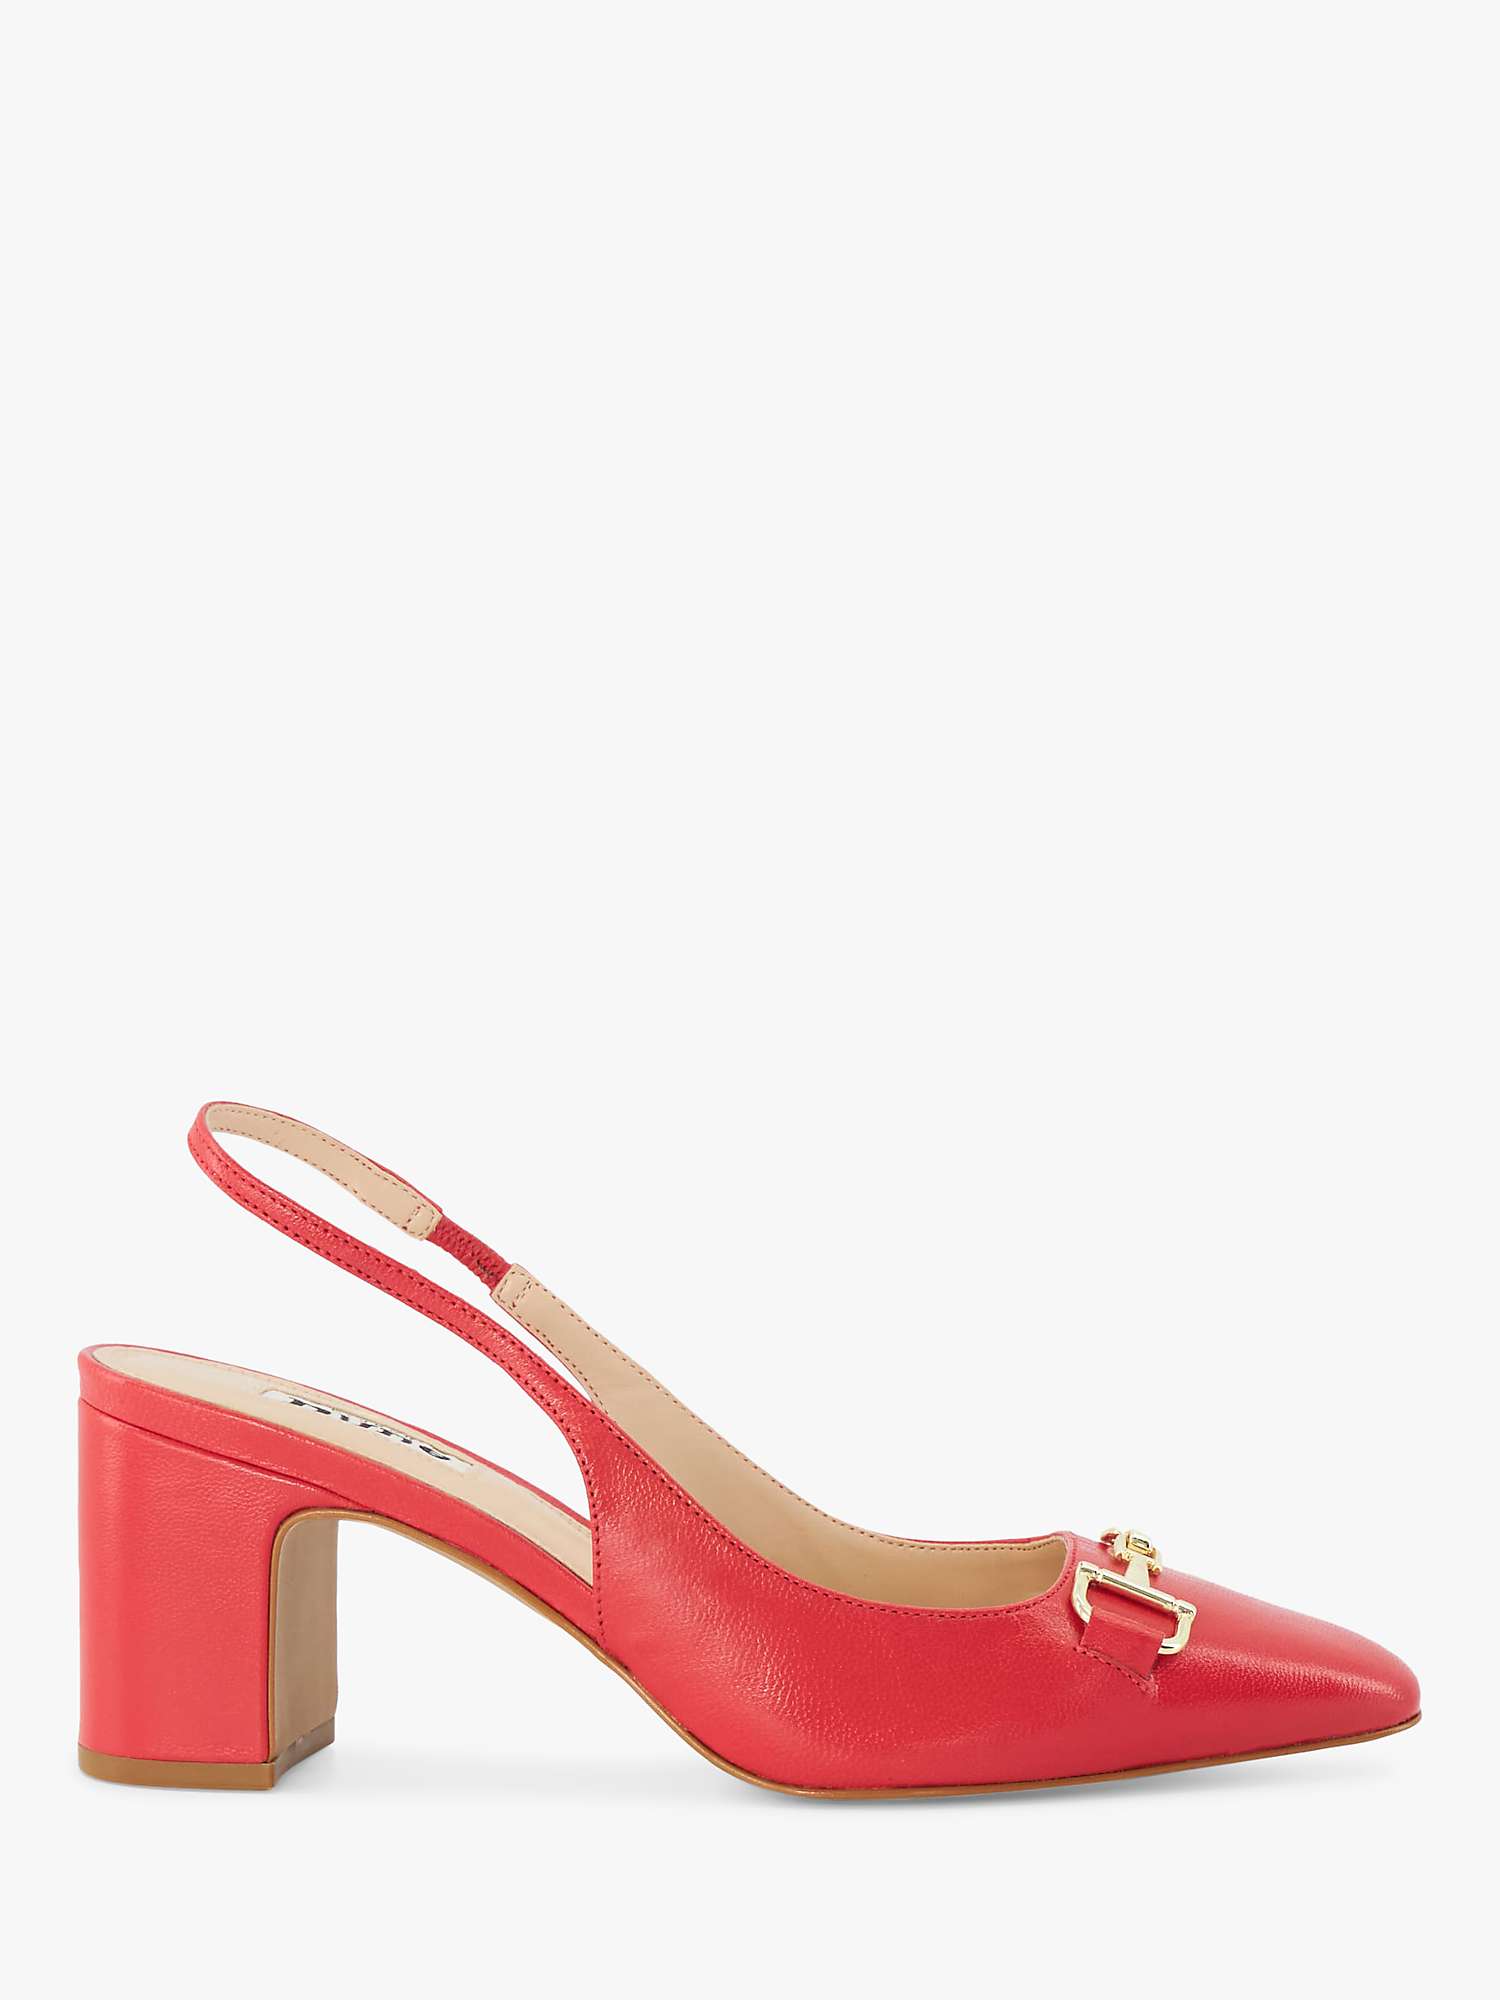 Buy Dune Detailed High Heel Leather Court Shoes Online at johnlewis.com